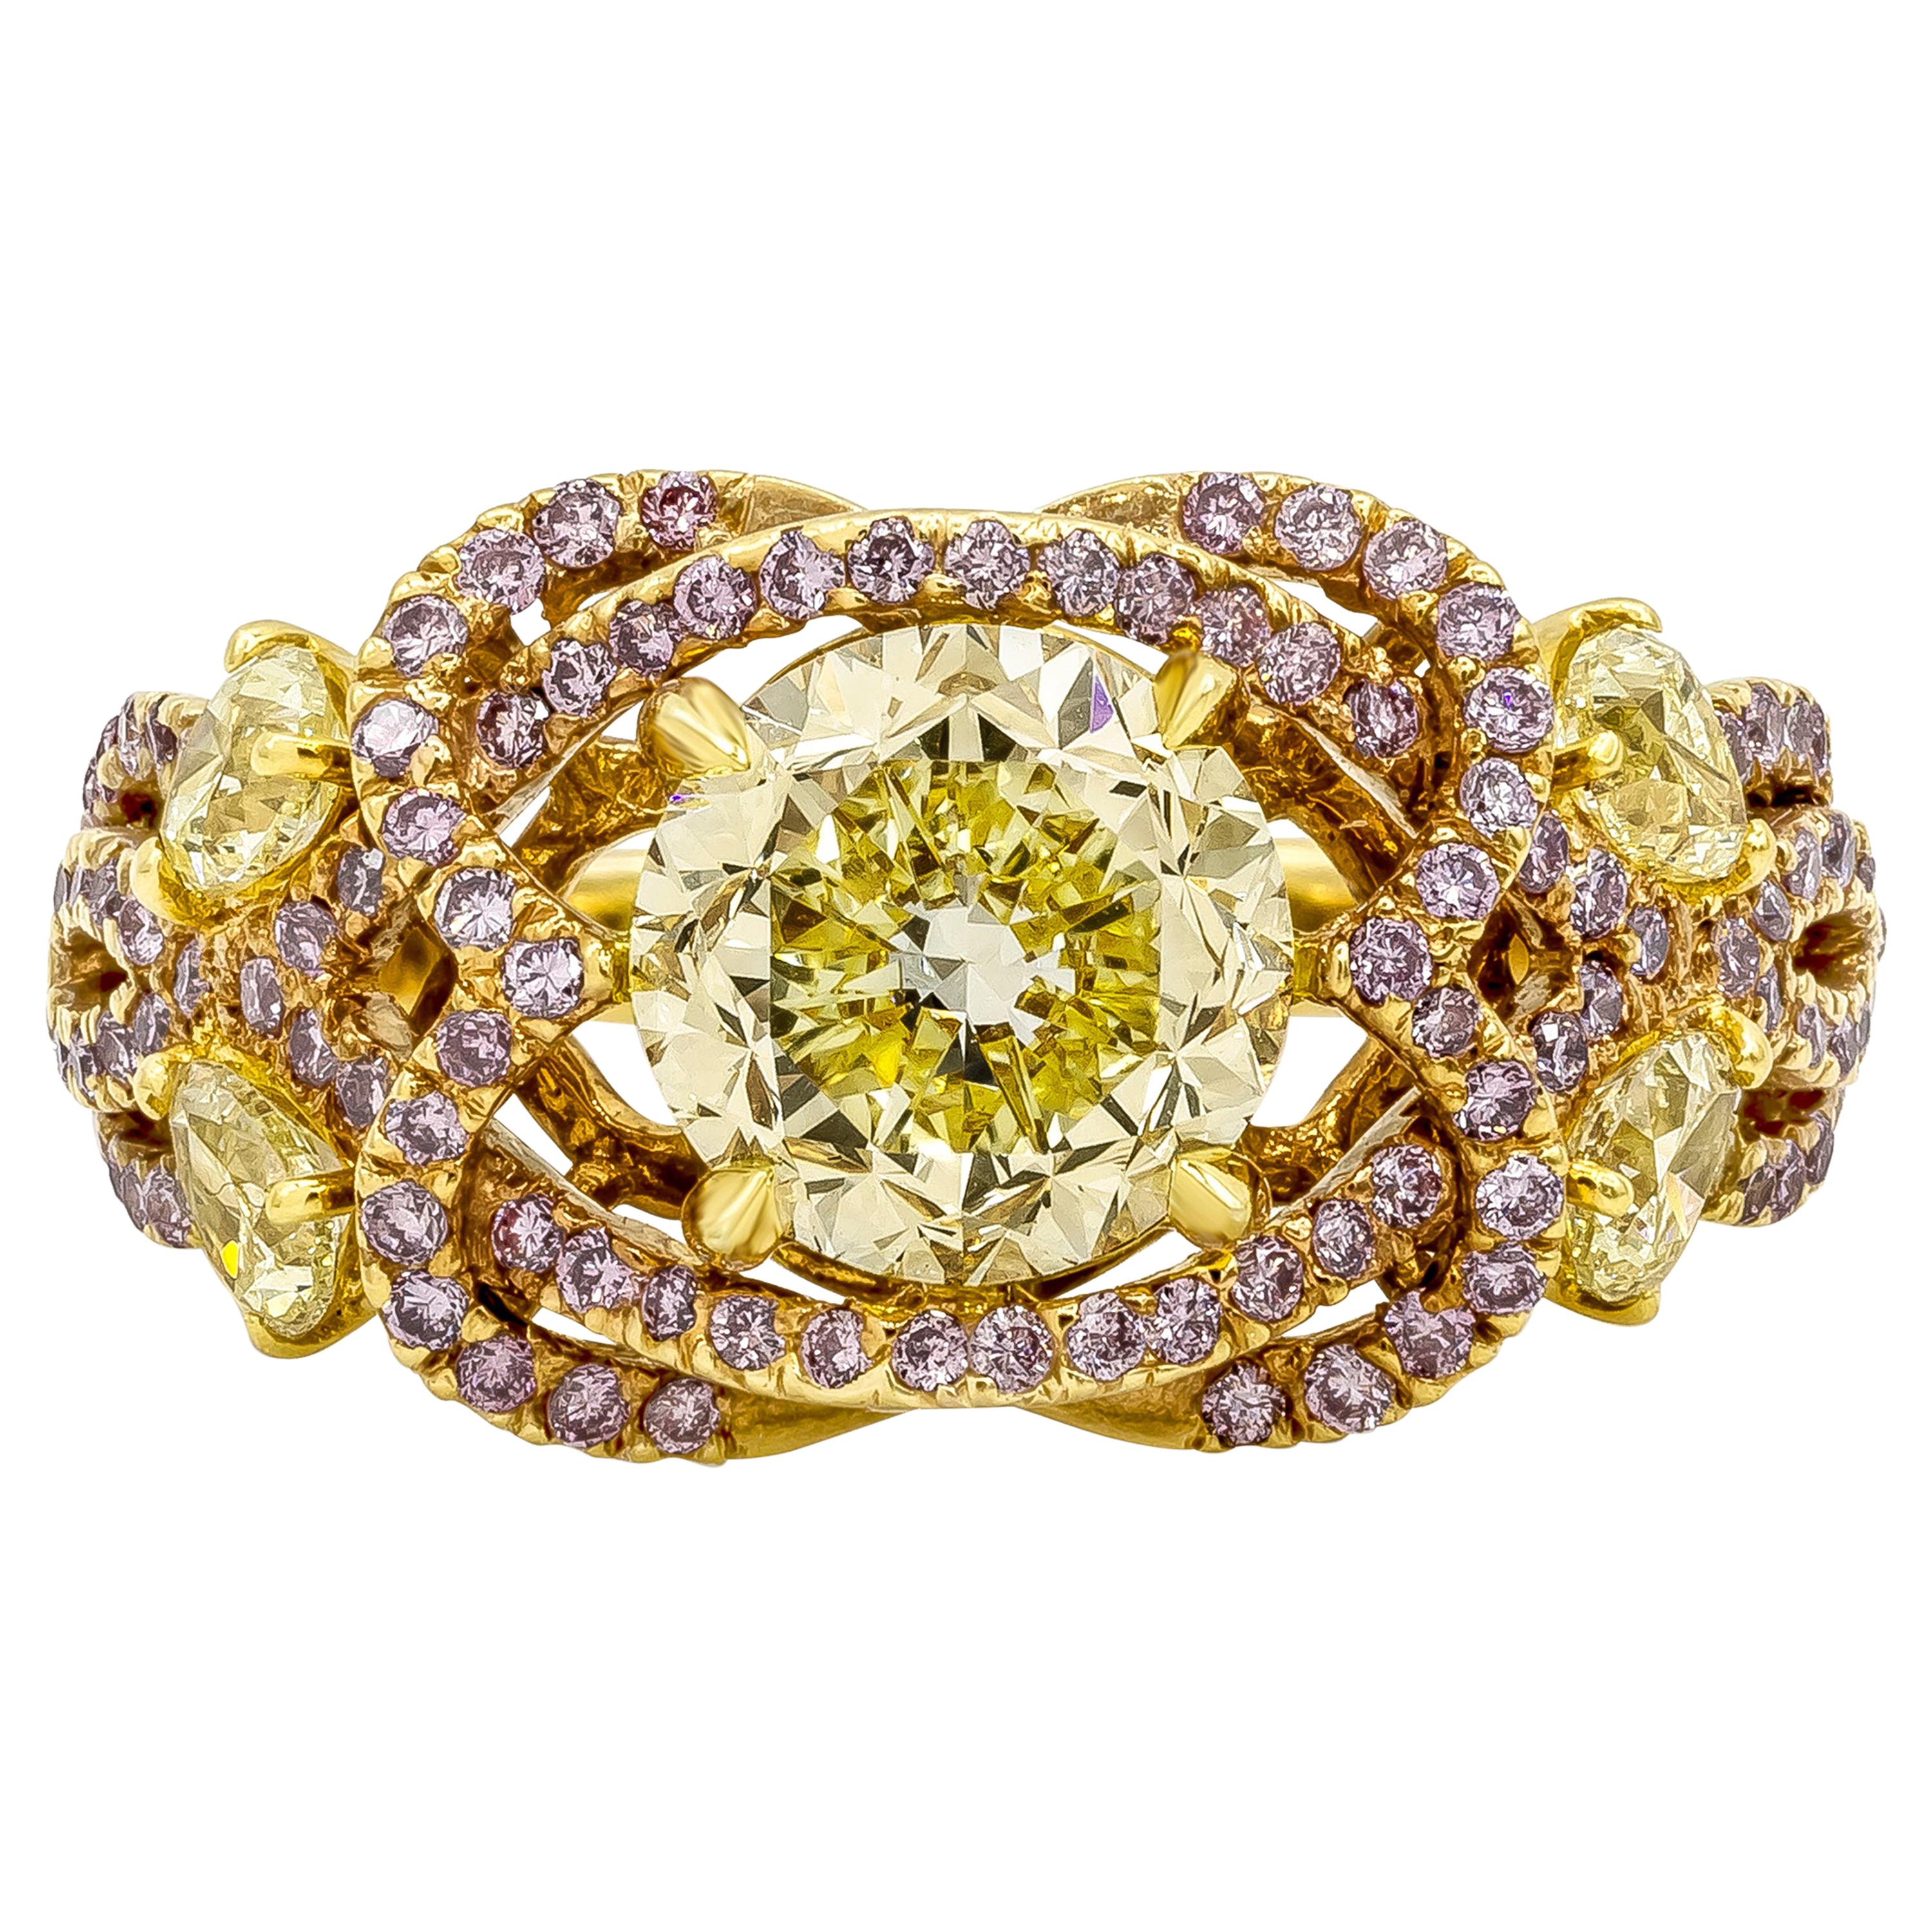 1.97 Carats Mixed Cut Fancy Intense Yellow and Pink Diamond Engagement Ring For Sale